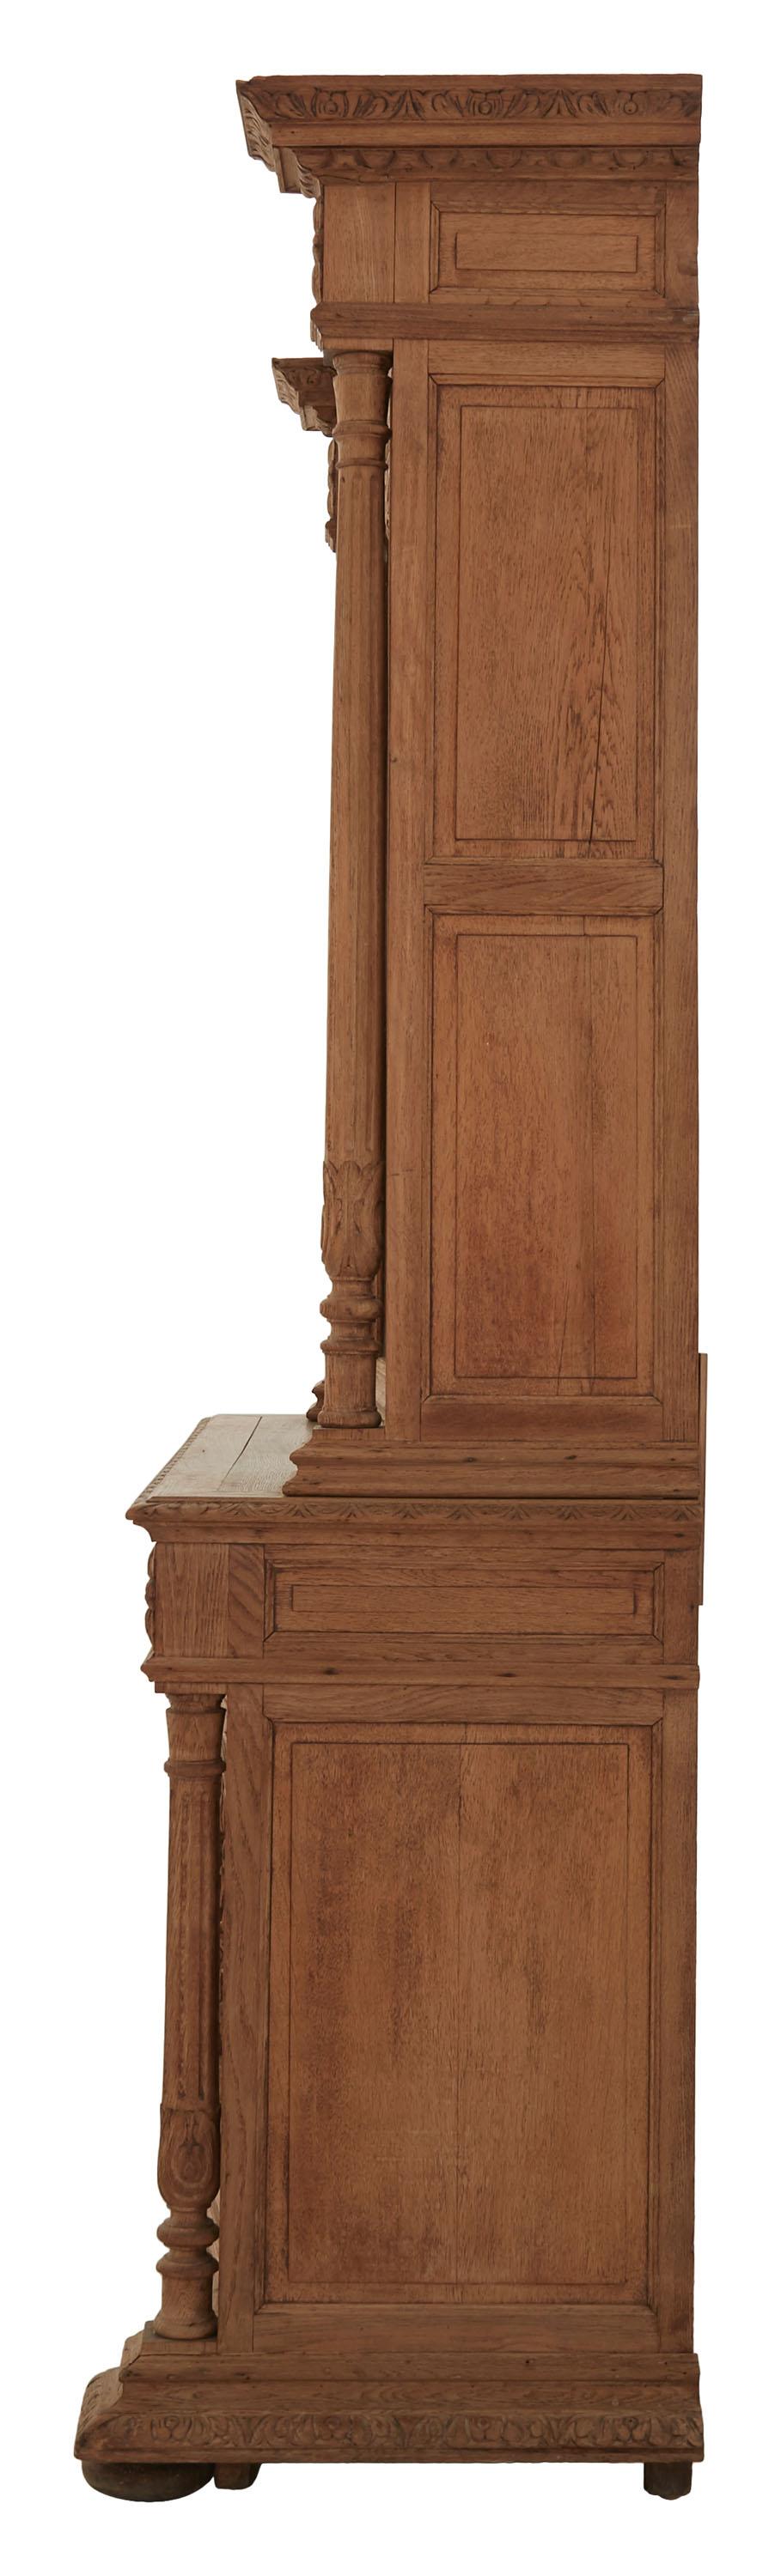 Hand-Carved Mid-19th Century French Hunt Cabinet